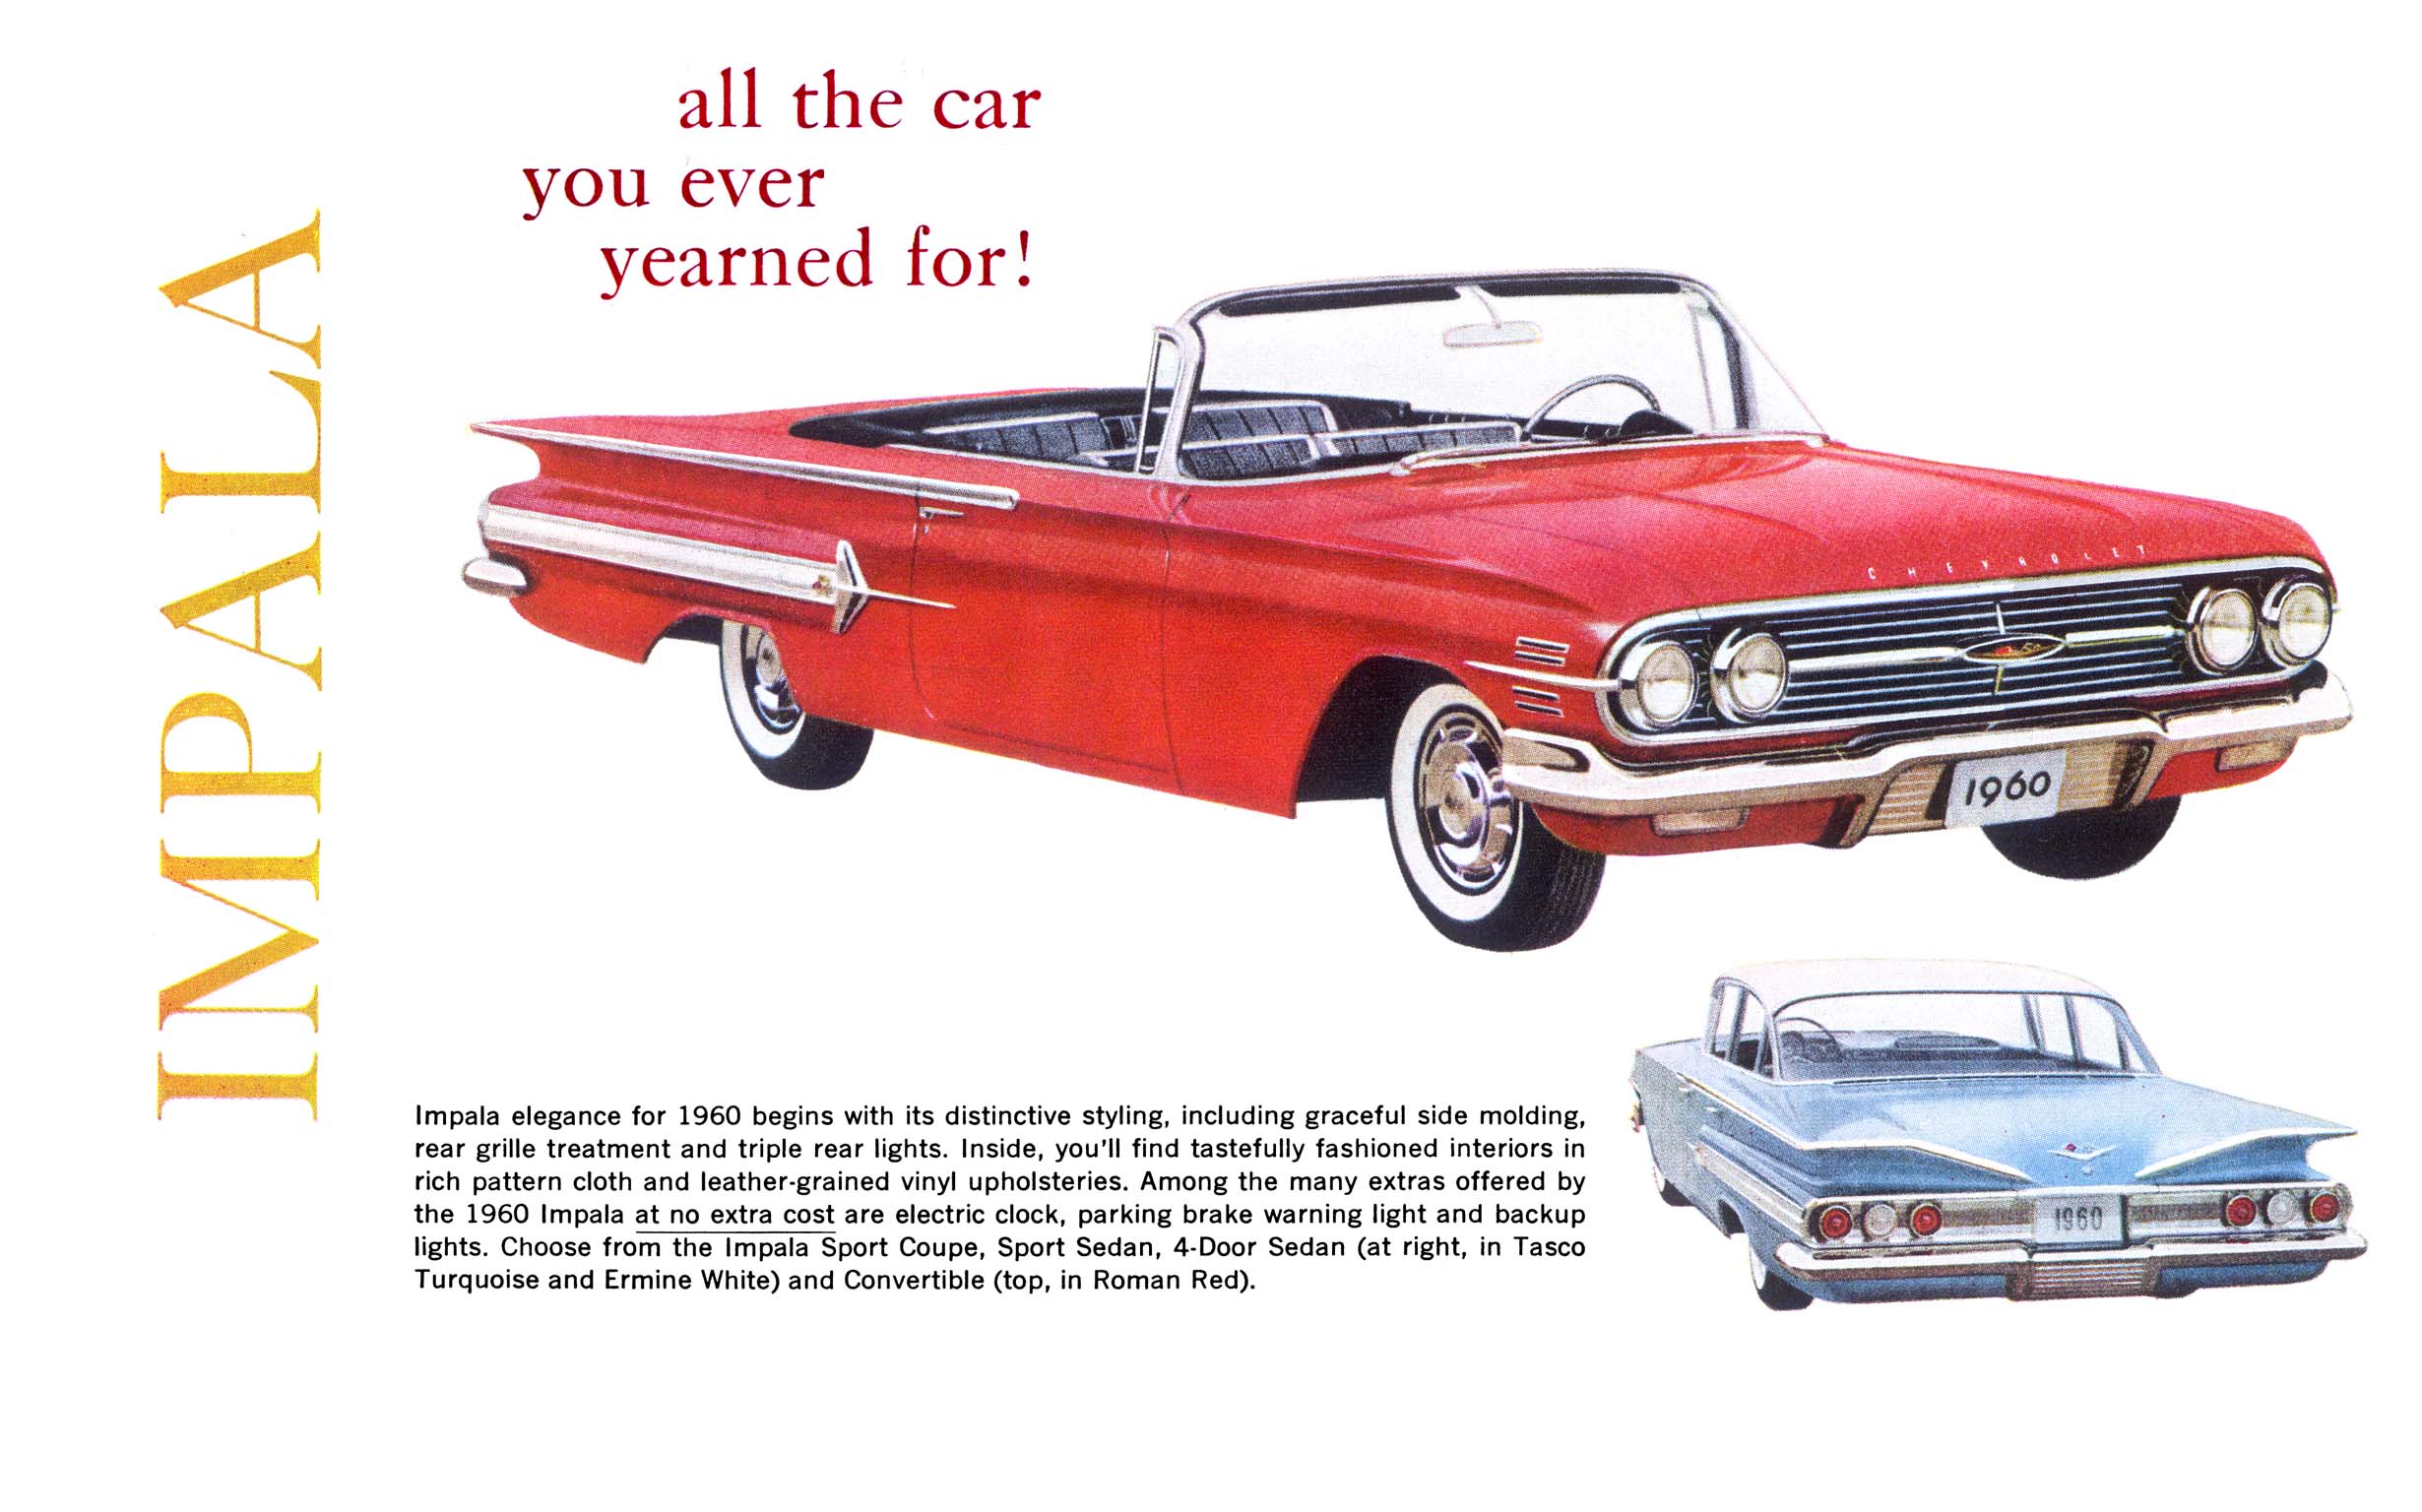 1960_Chevrolet_Buying_Guide-02